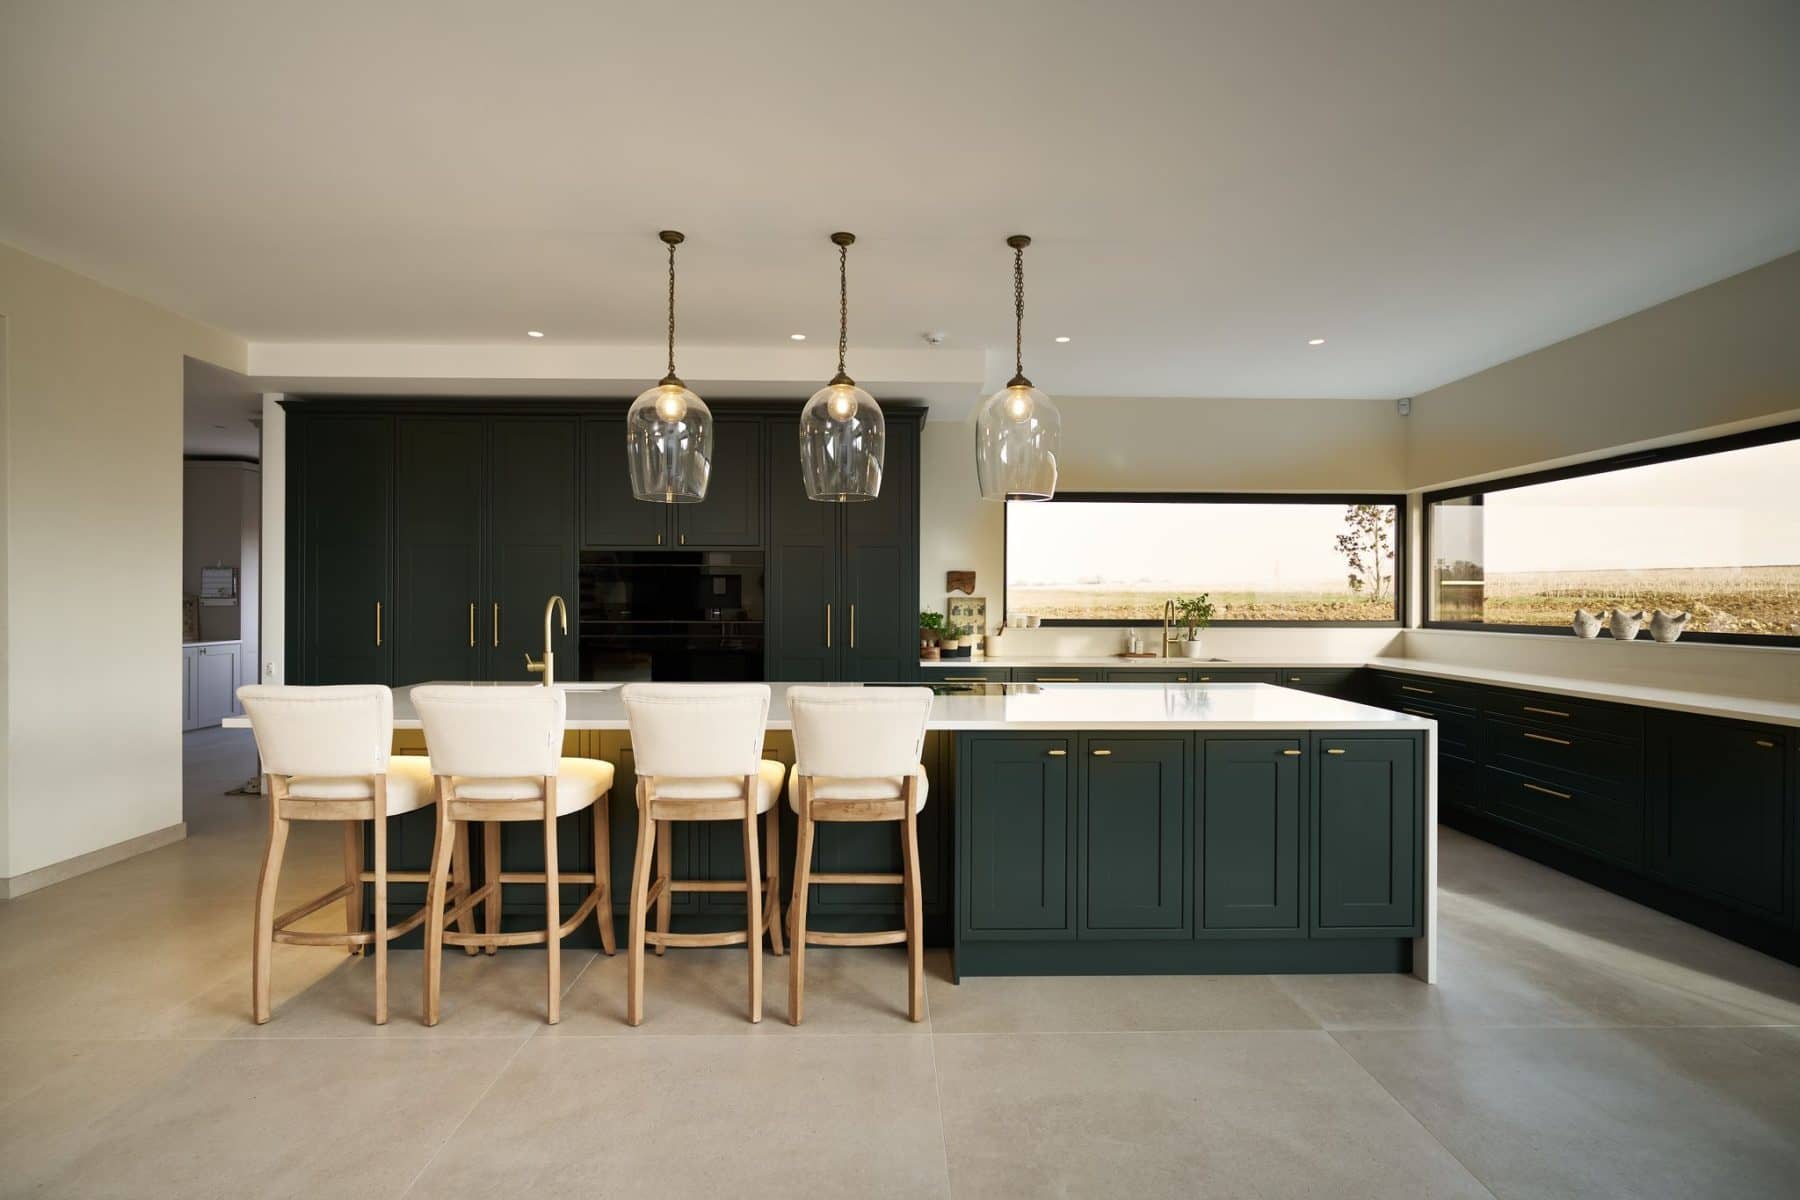 A modern kitchen with dark green shaker cabinetry, a large island with white countertops and light wooden bar stools, illuminated by three pendant lights, and featuring large windows with scenic views.